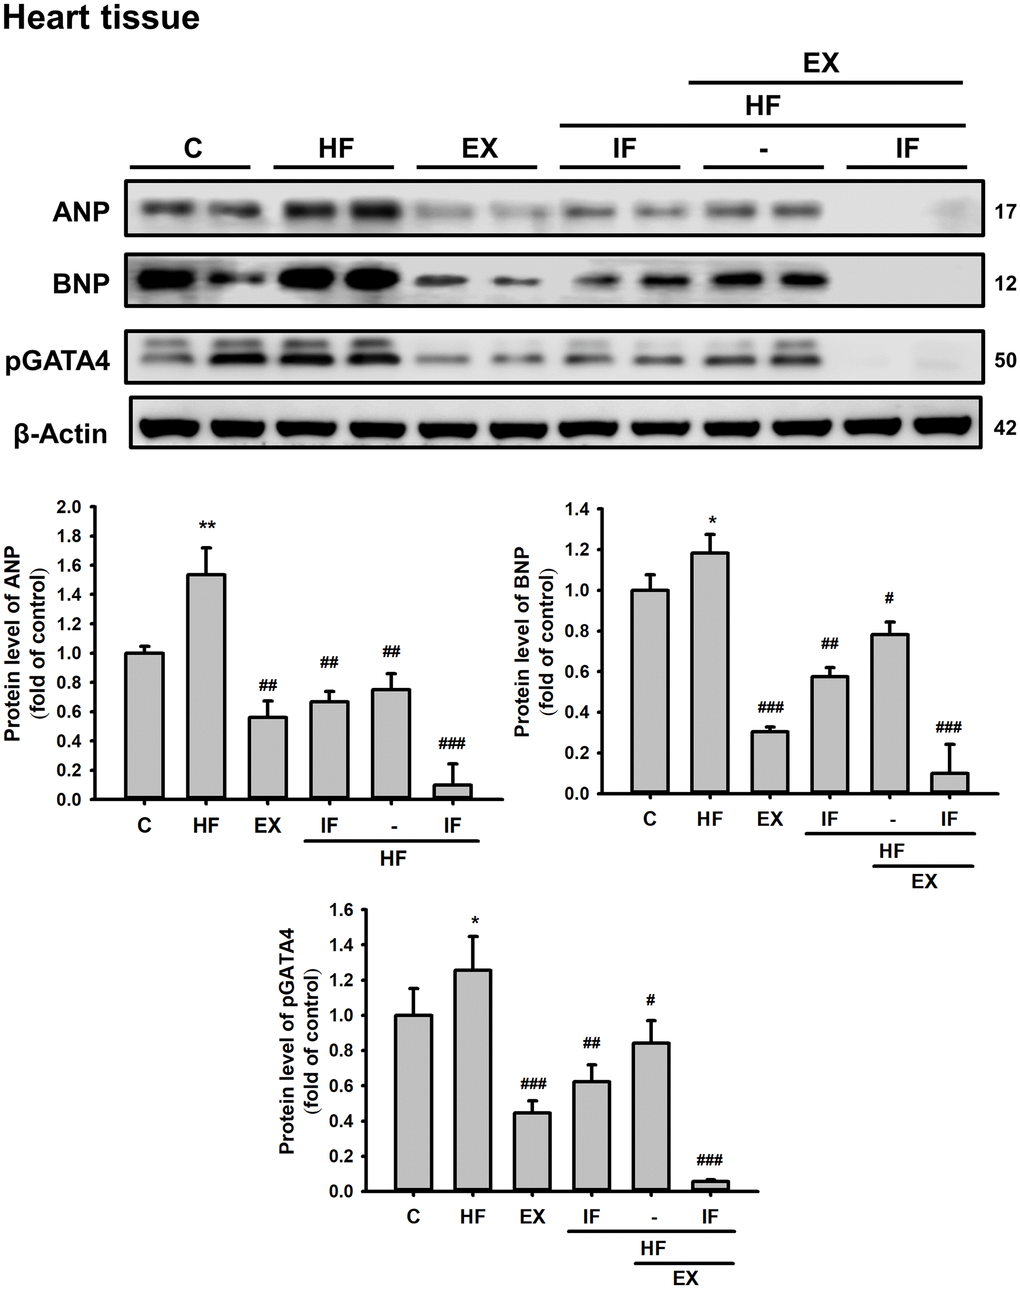 Combined administration of IF peptide and exercise show better regulation of HFD induced cardiac hypertrophic markers in SAMP8 aging model. The levels of survival and apoptosis protein such as ANP, BNP, and pGATA4 in aging mice heart show. All protein samples from each rat group were analyzed by Western blotting (n = 6). The protein expression folds were normalized with β-actin. C: Control; HF: High-fat diet; EX: Exercise; HF+IF: High-fat diet+IF; HF+EX: High-fat diet+ Exercise; HF+EX+IF: High-fat diet+ Exercise+ IF. Bars indicate the mean ± SEM obtained from experiments performed in triplicate. *P**P#P##P###P